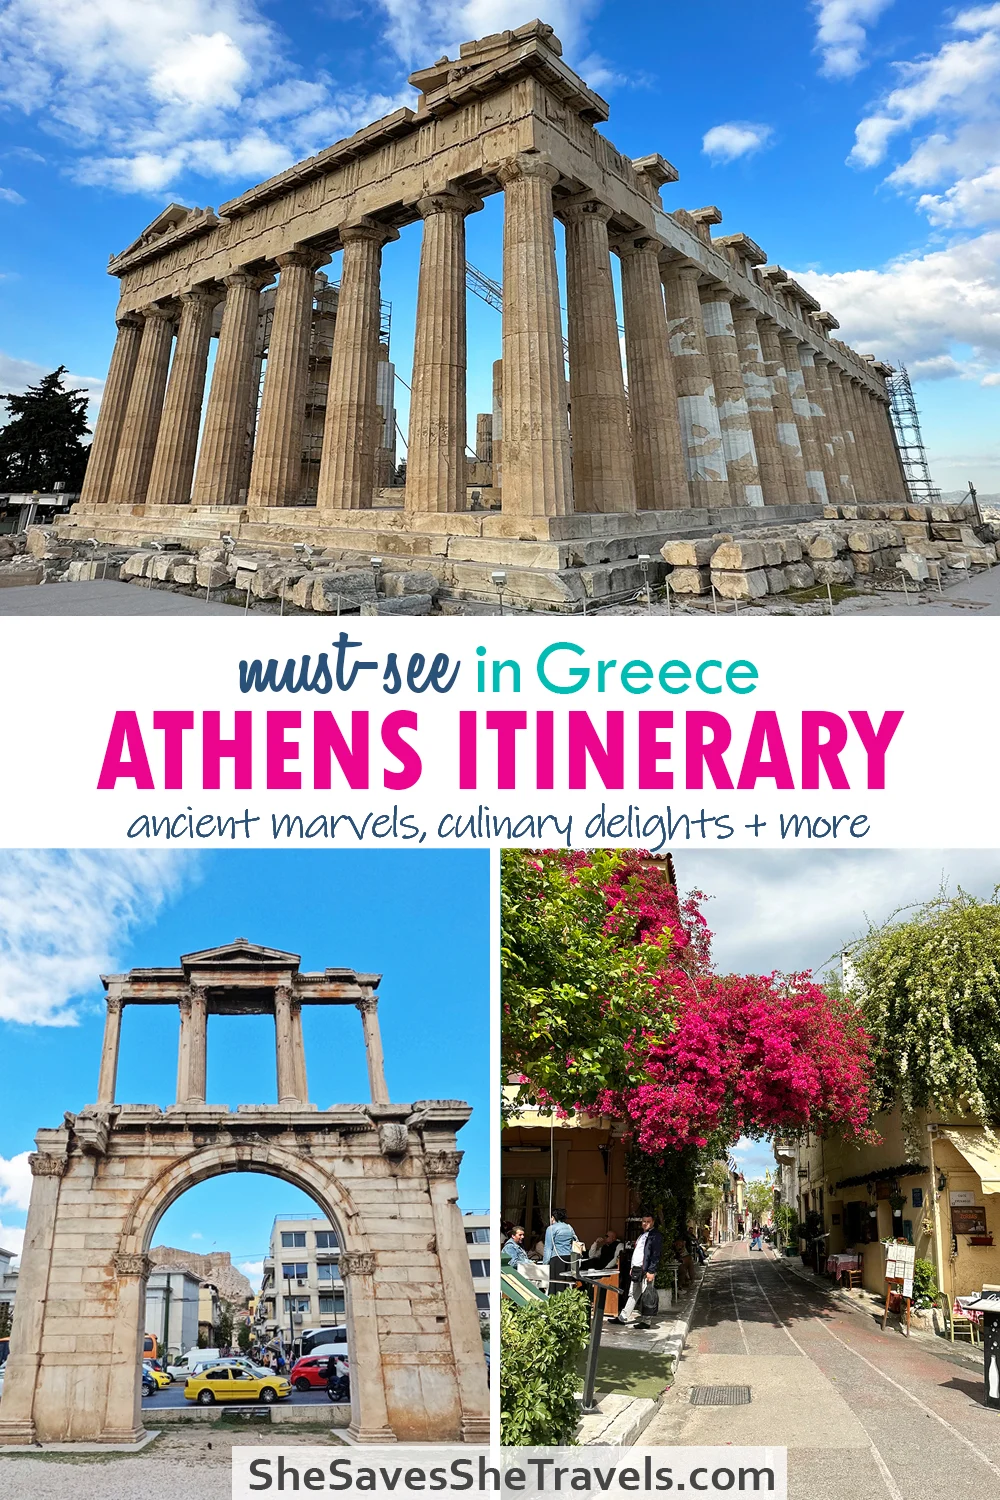 must-see in Greece Athens Itinerary ancient marvels, culinary delights + more with photos of parthenon, arch and street with flowers